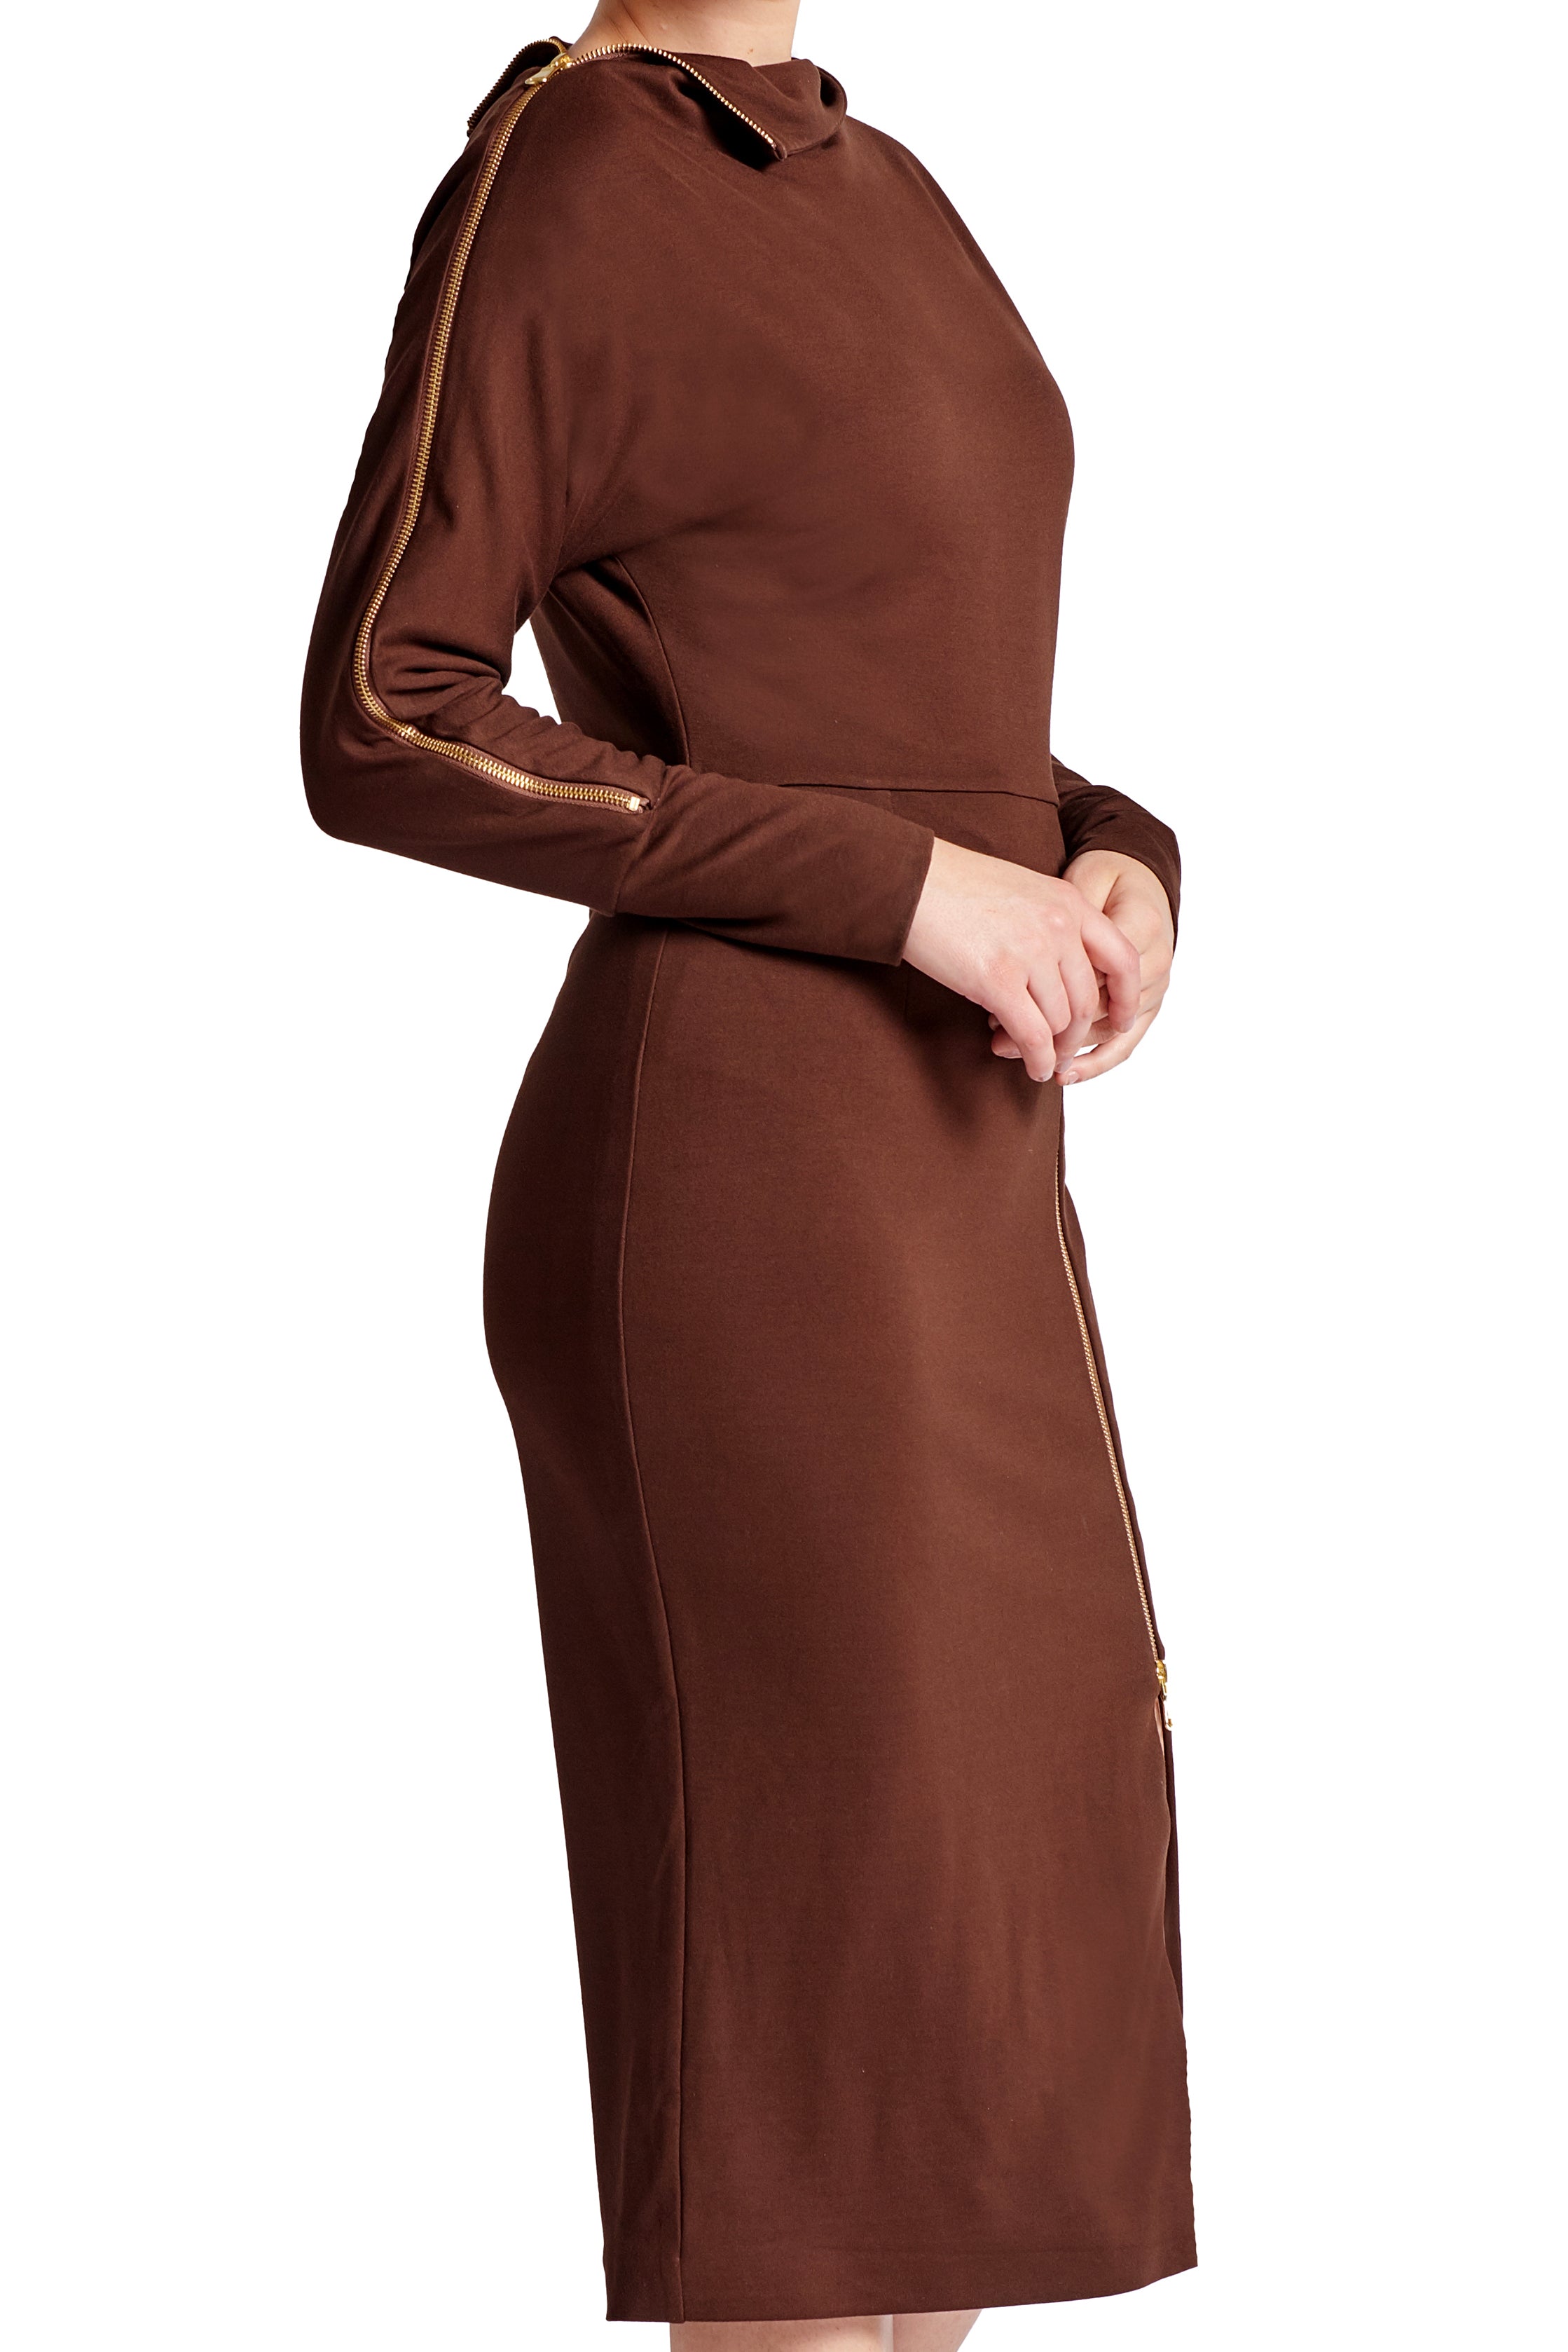 3/4  close-up front view of model wearing the Simona Maghen Josefa Dress, chocolate brown long sleeve Ponte midi dress with zipper along the right shoulder and front skirt zipper slit.